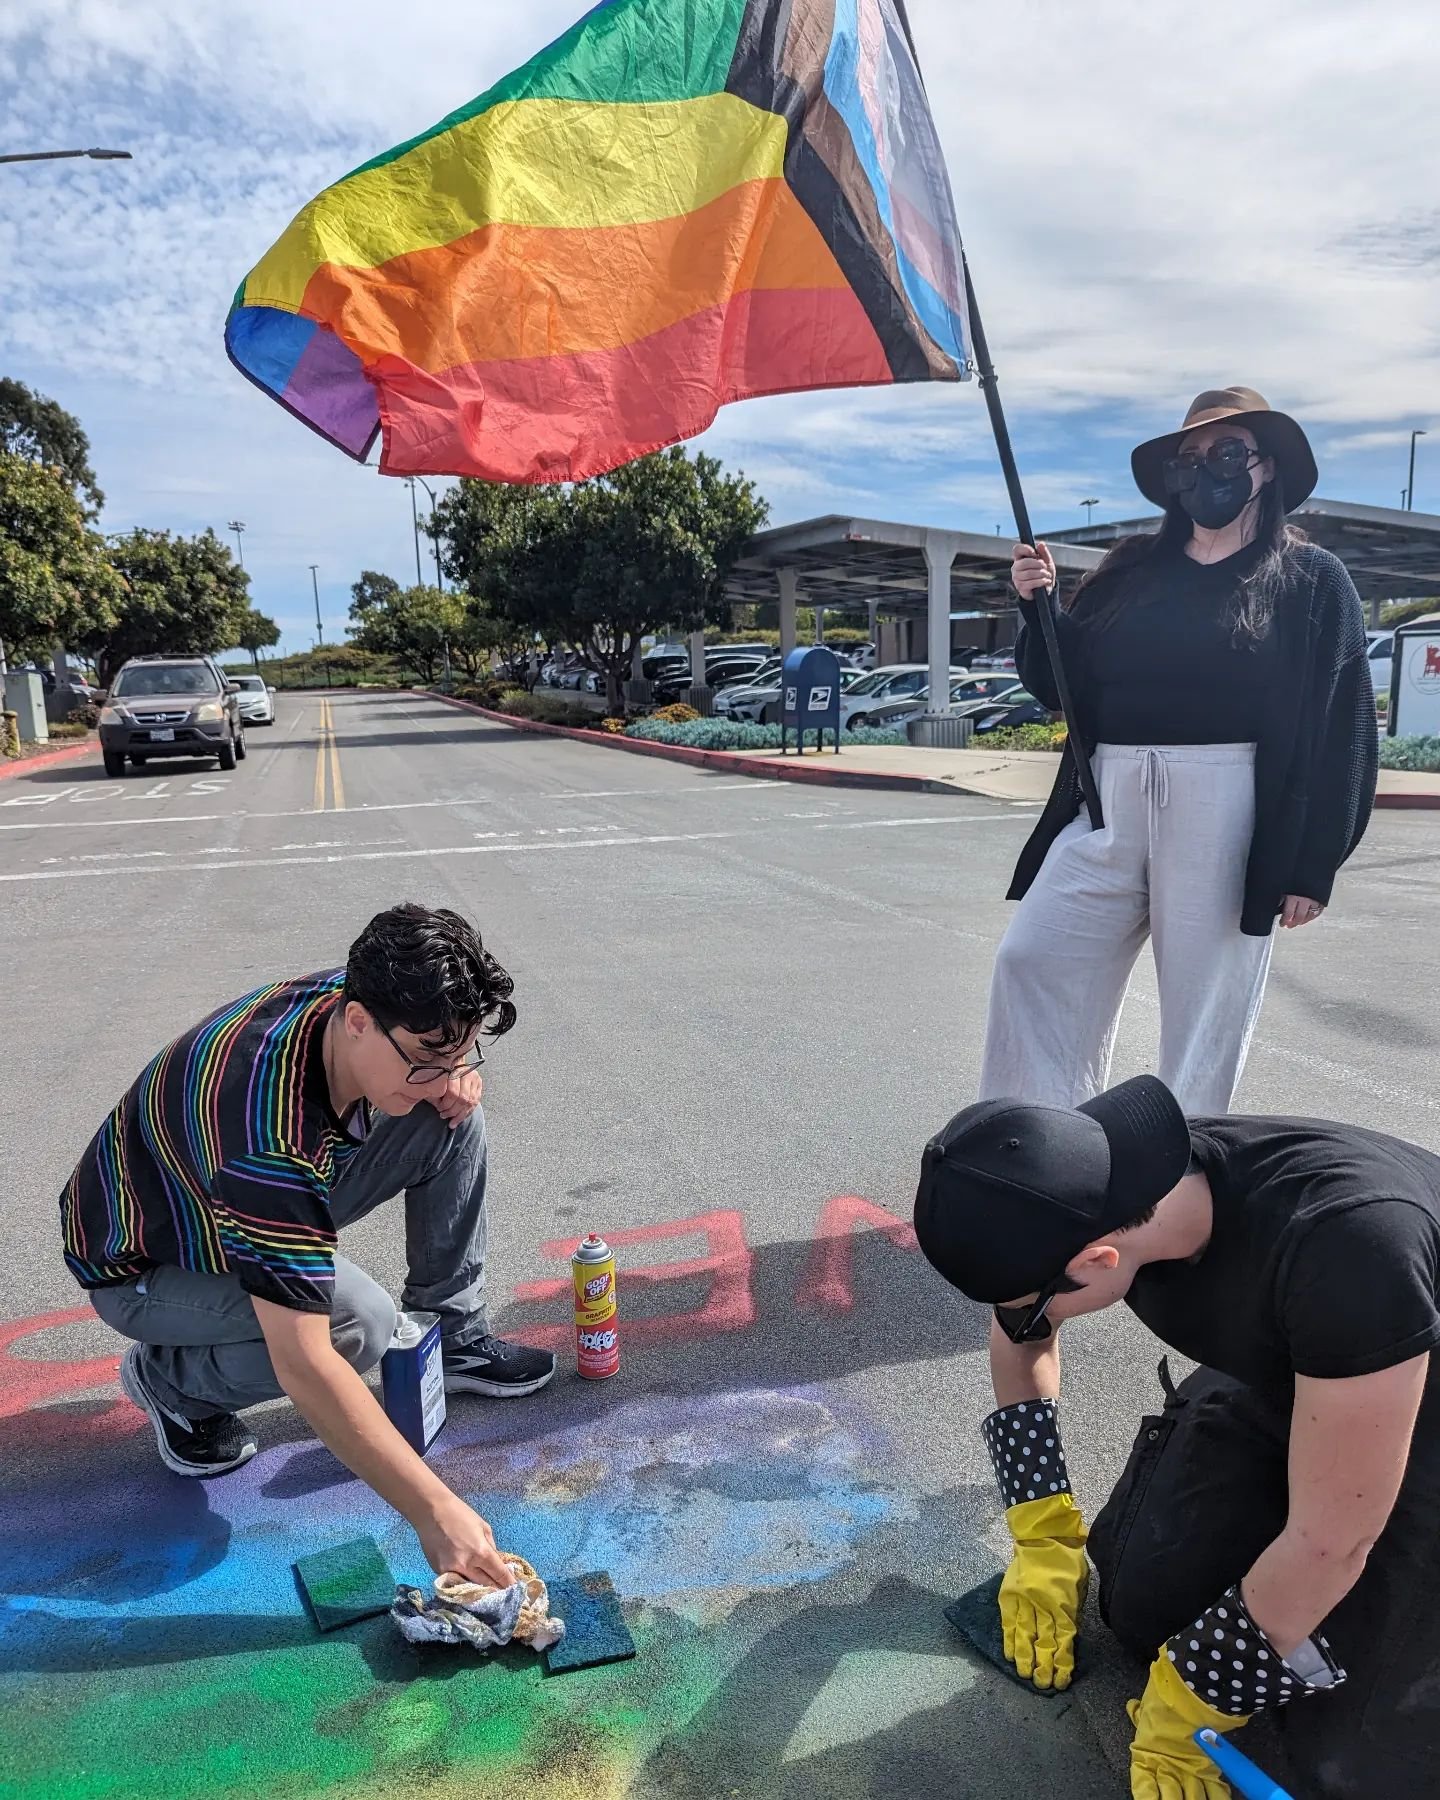 The LGBTQ community came out in force today to help protect the HB Library.  We don't know who tagged the library, or why, but we know there are better ways for the queer community to channel our fear, anger, and need for justice. 

Huntington Beach 